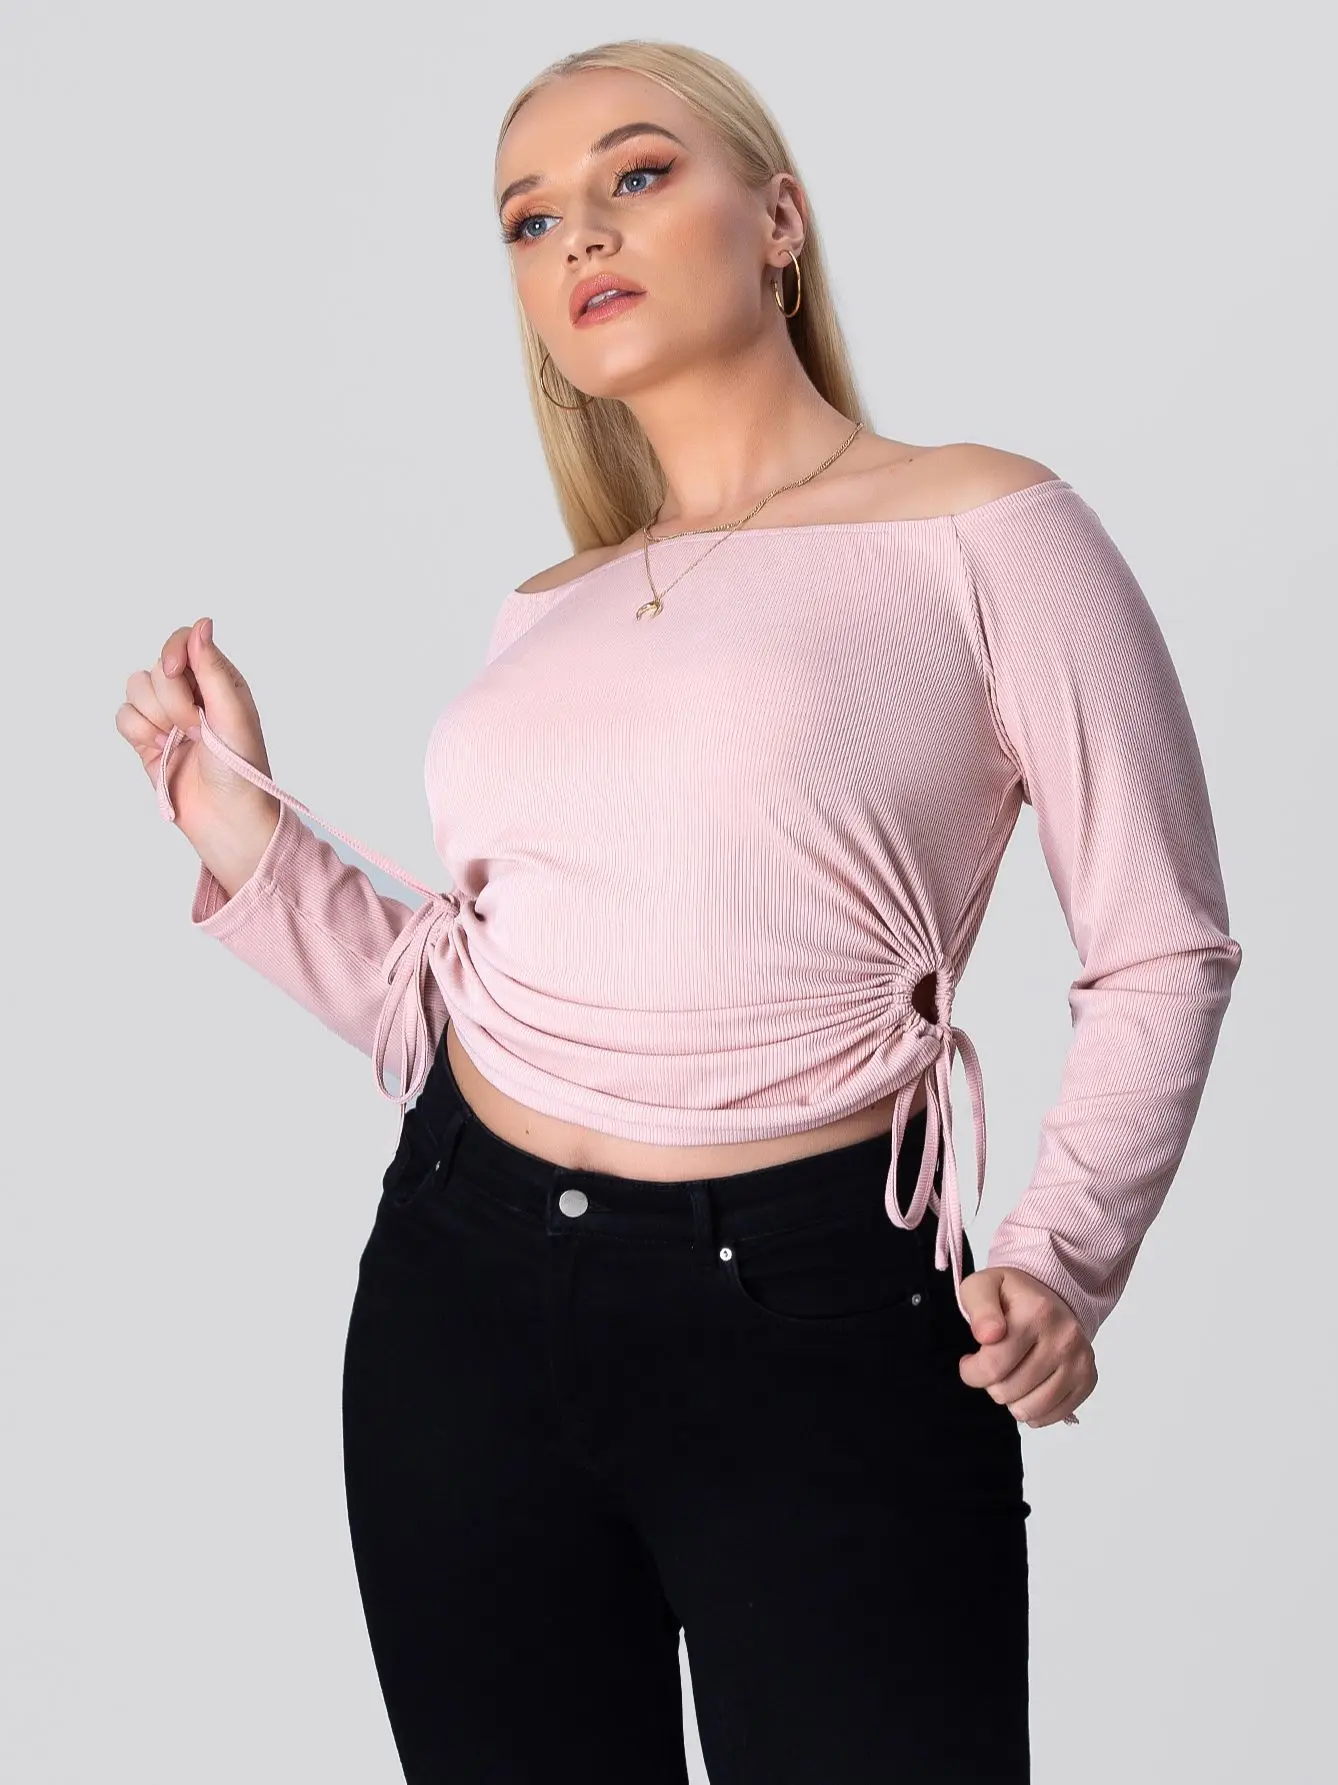 Plus Size Pink Cropped Tops Autumn Winter 2022 Women Large Y2k 4XL Long Sleeve Blouses Streetwear Casual Oversize Ladies T Shirt